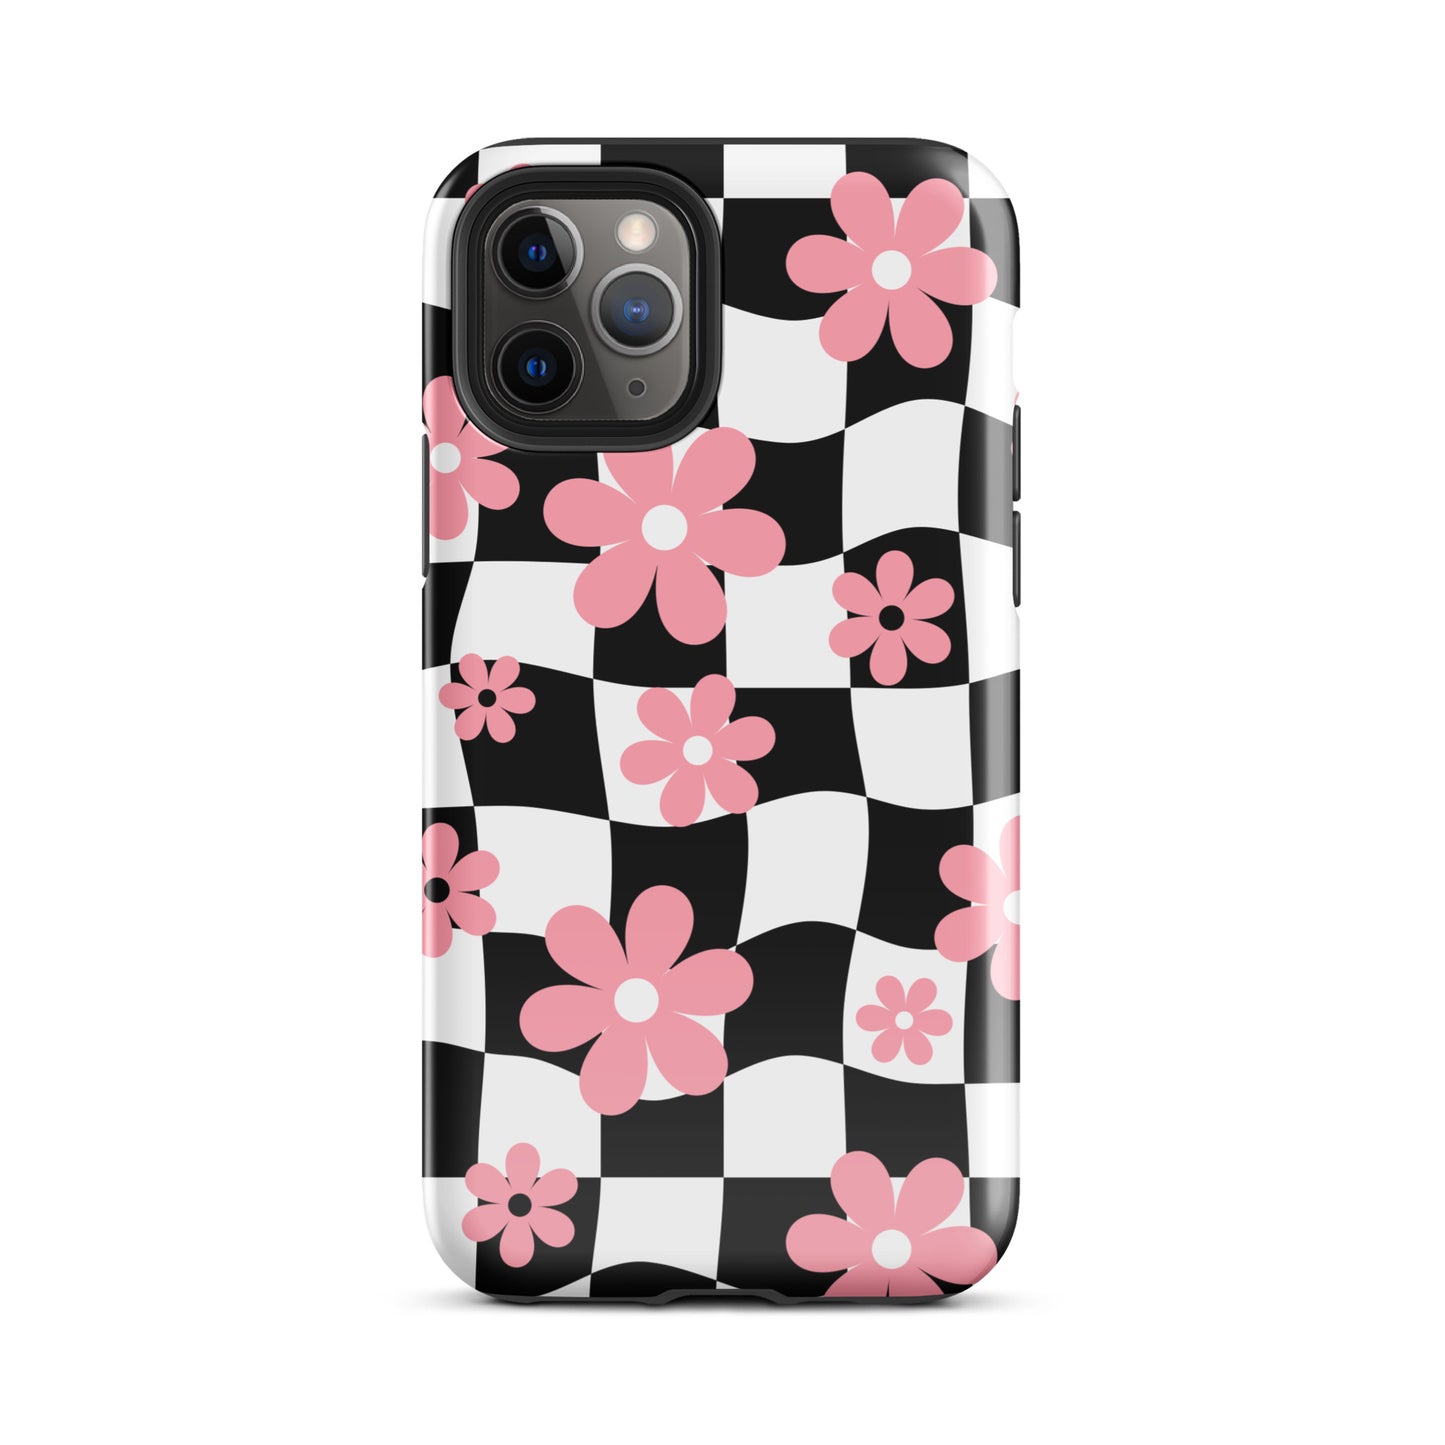 Floral Wavy Checkered iPhone Case iPhone 11 Pro Glossy